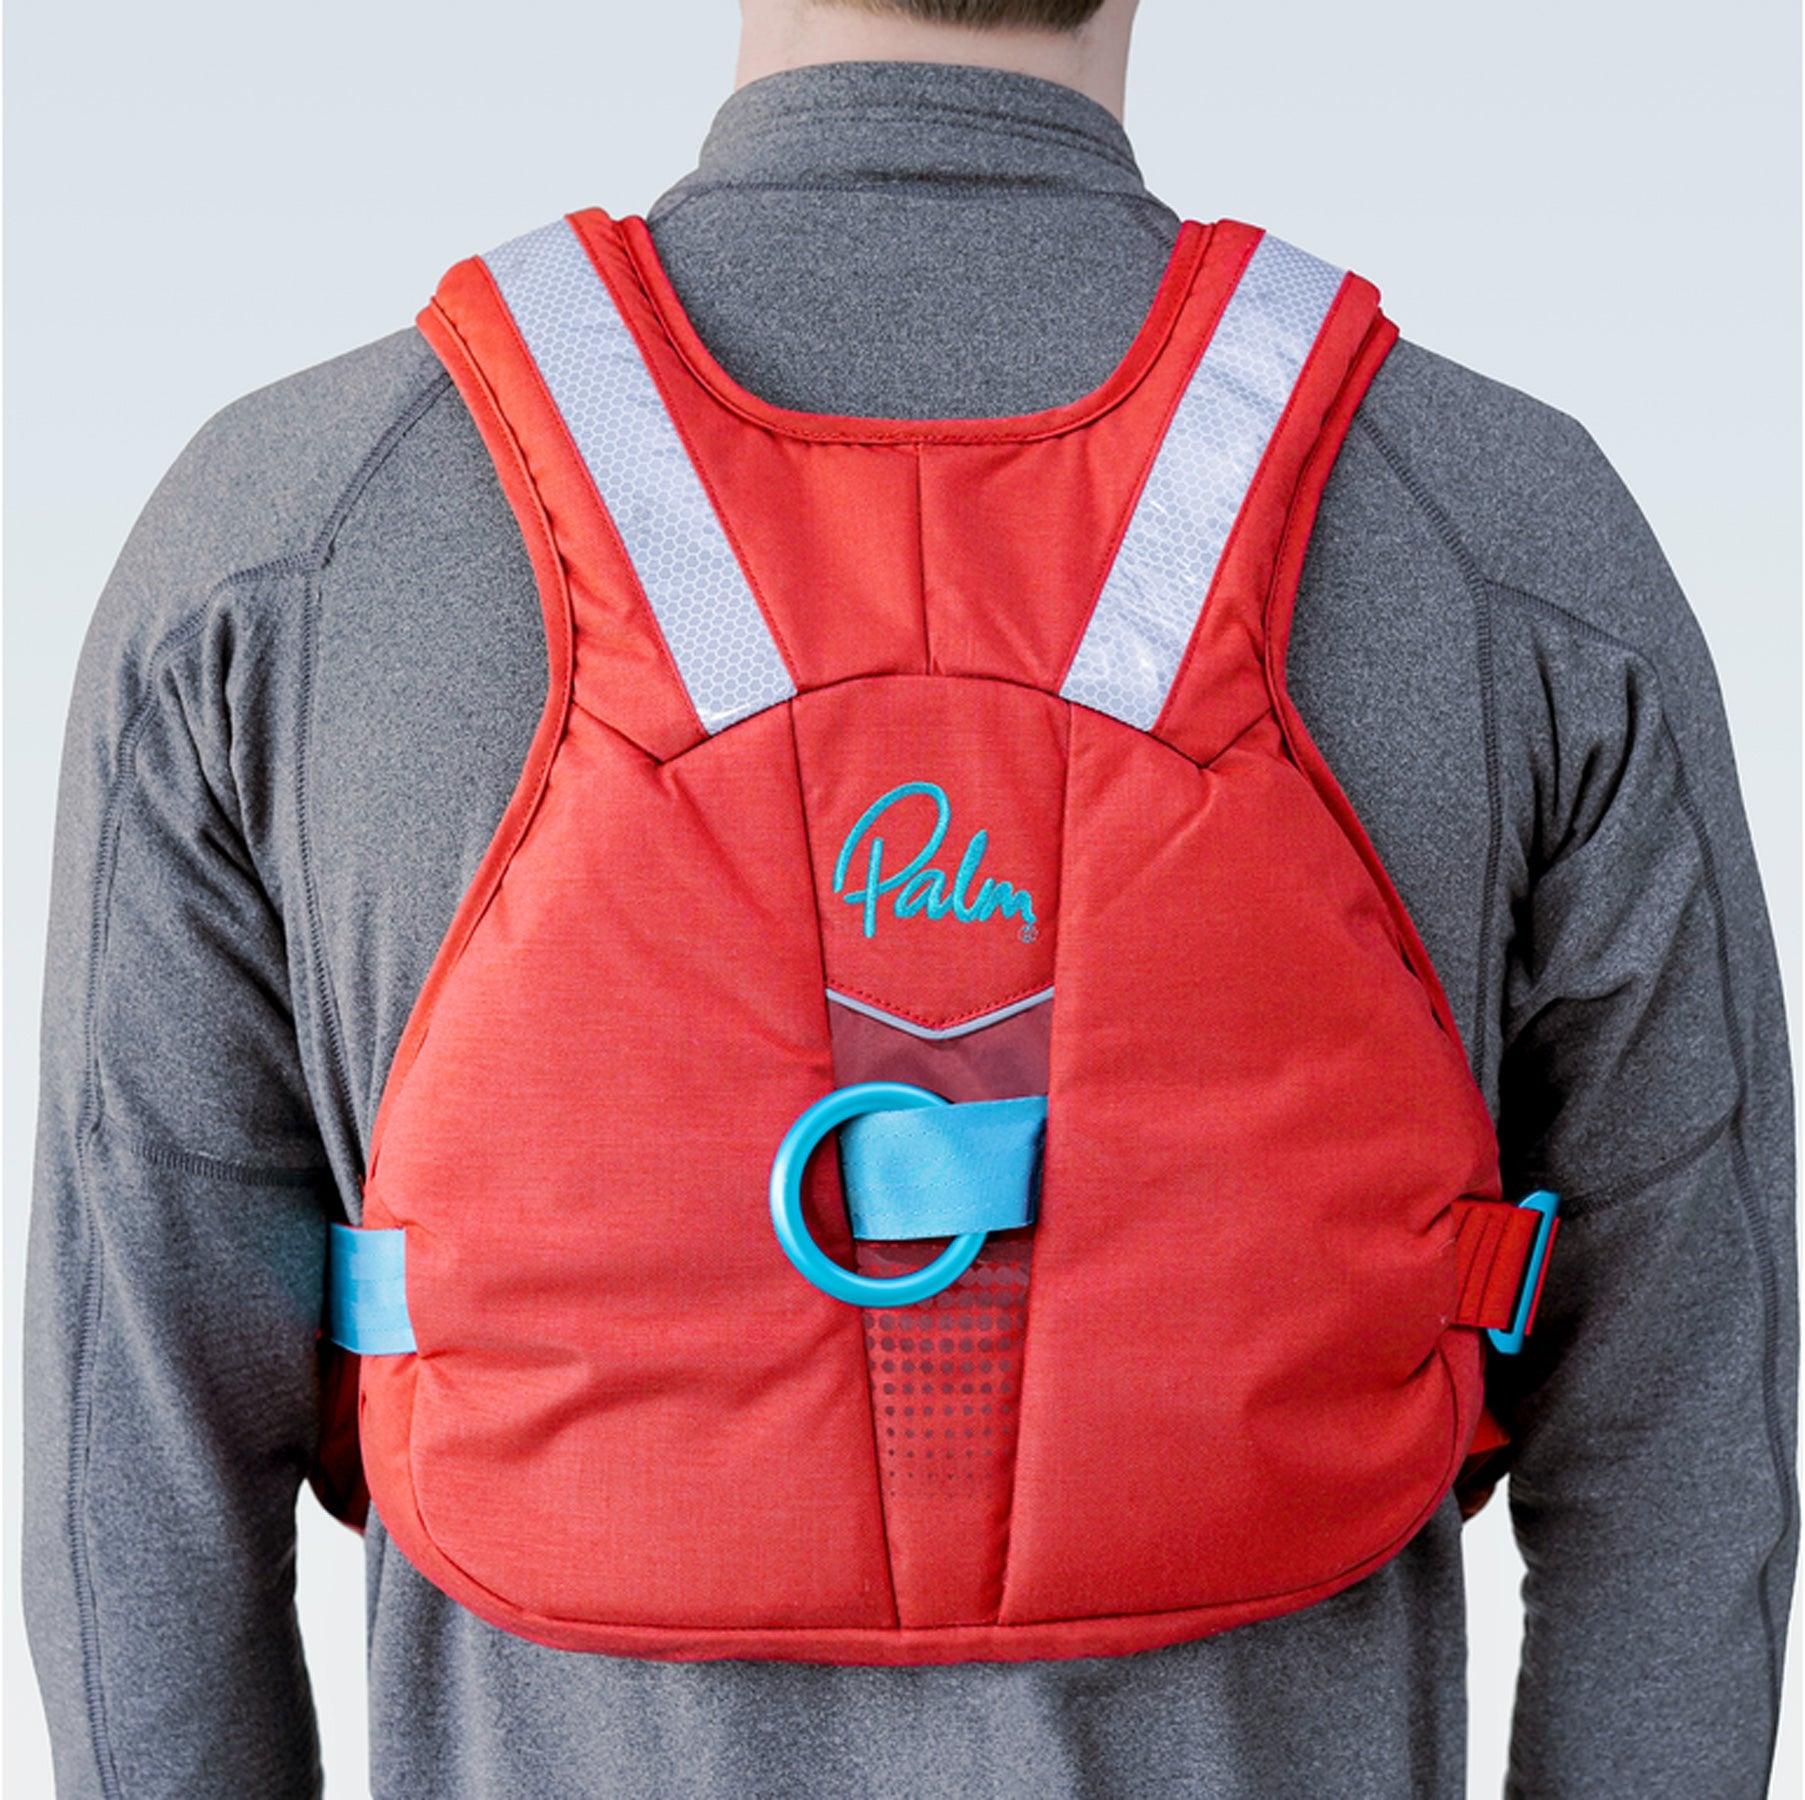 The rear of a Palm Nevis Buoyancy aid showing the reflective strips and quick release belt/loop